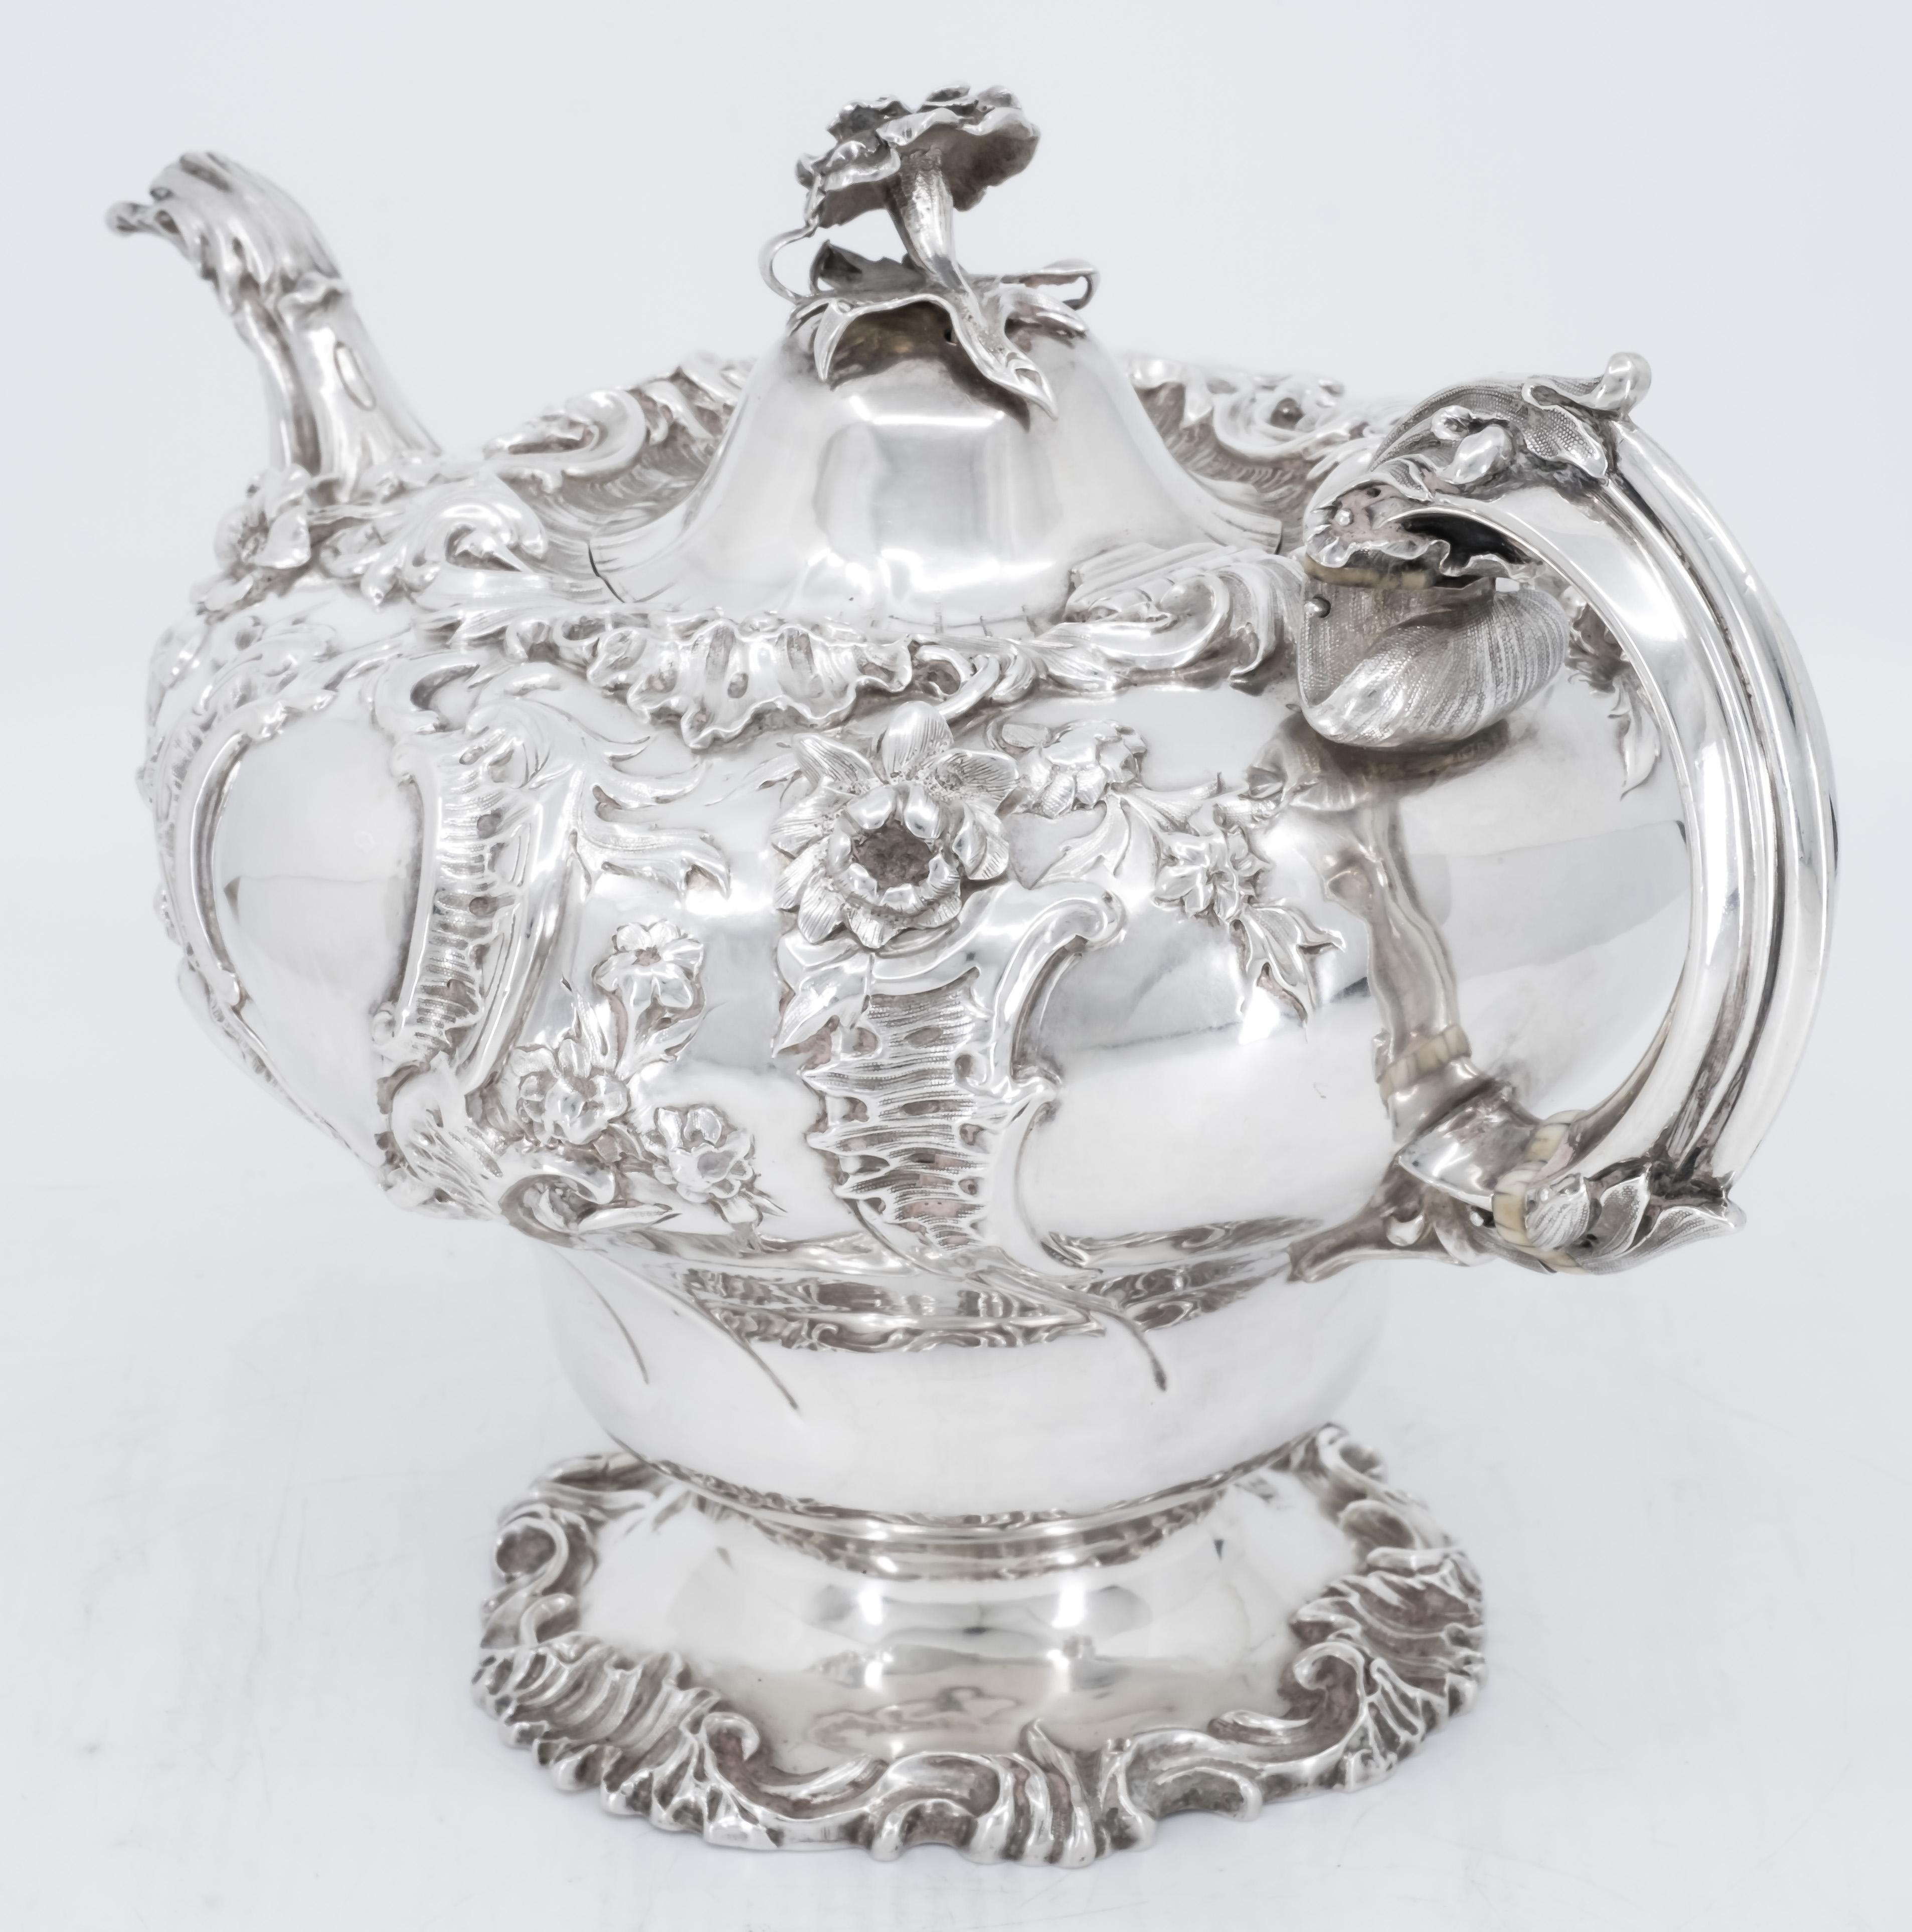 Tea Services in Rococo Style, London Sterling Sliver 925, Early 19th Century In Good Condition For Sale In Lantau, HK